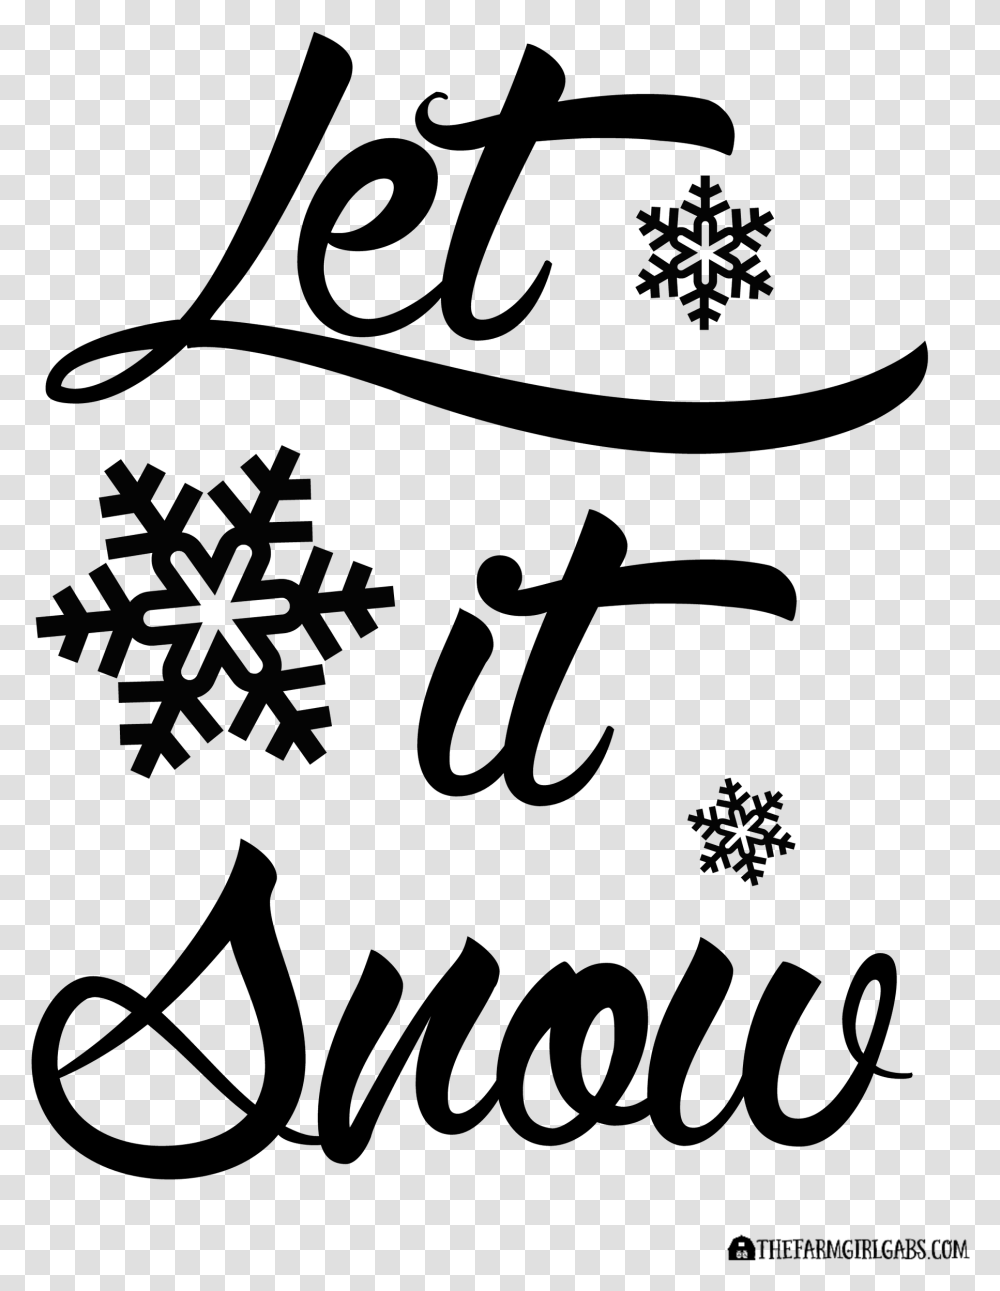 Let It Snow Printable From Rock It Baby, Nature, Outdoors, Astronomy, Night Transparent Png